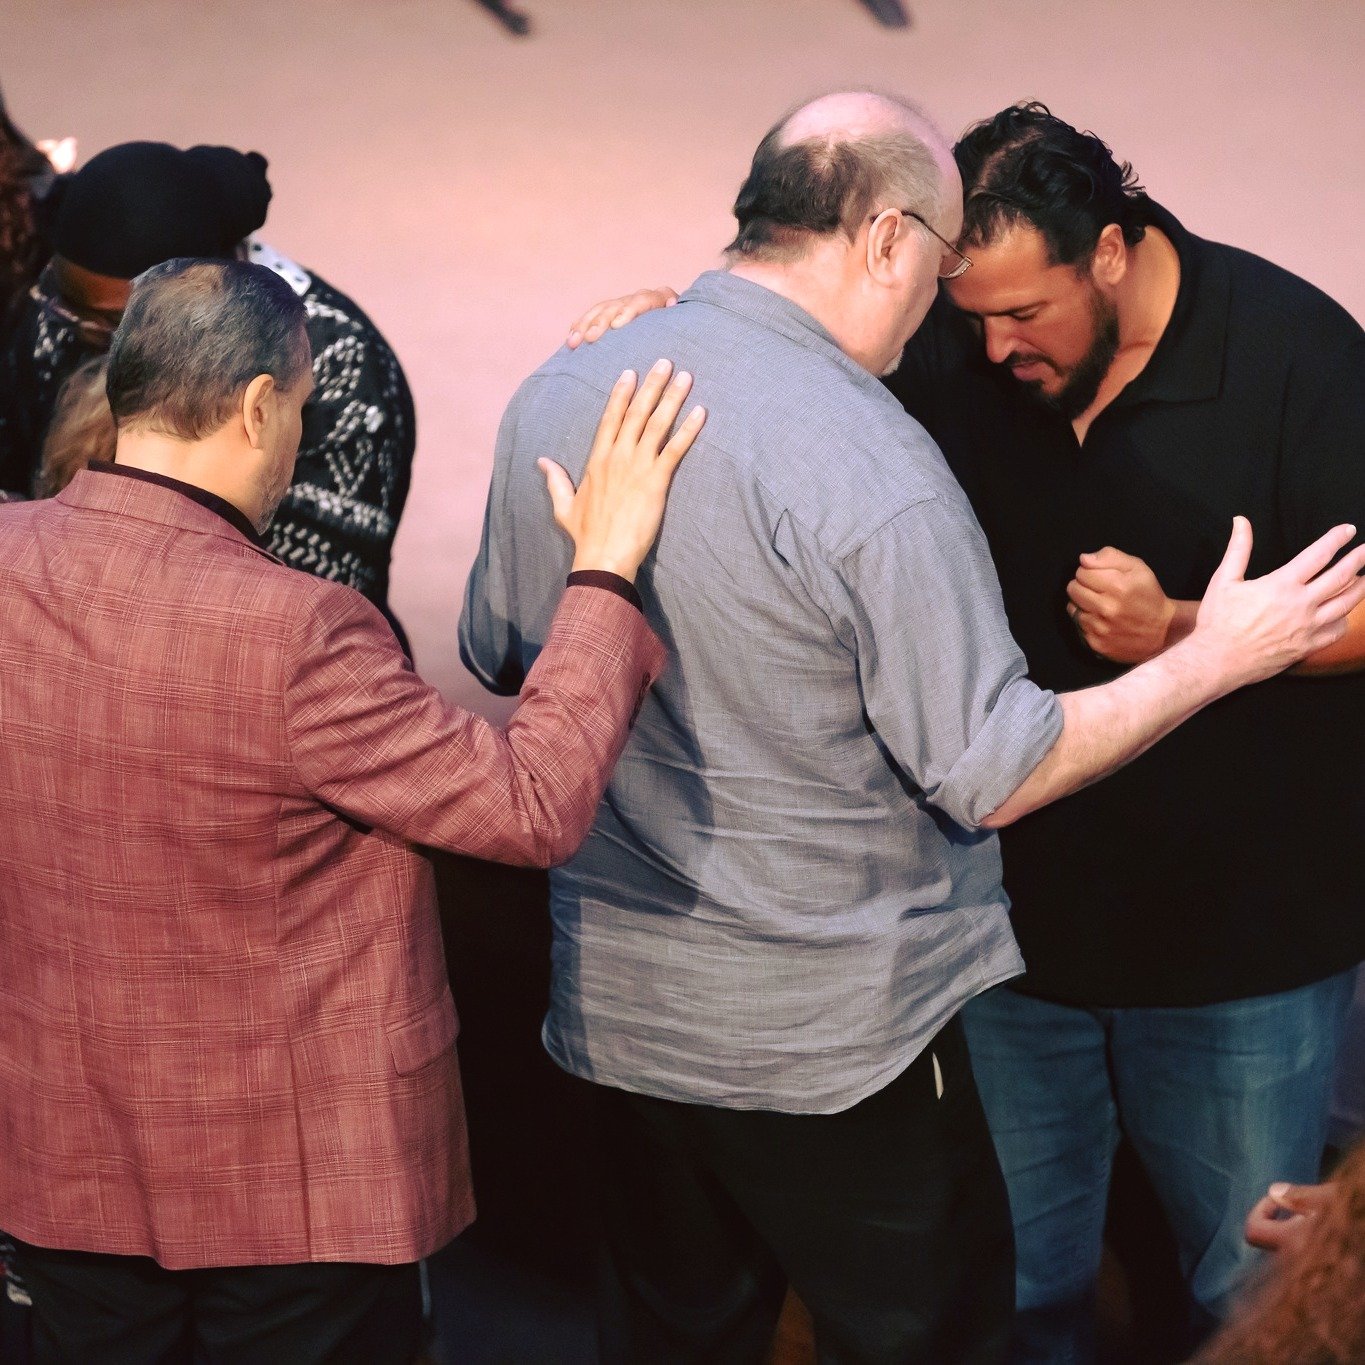 Prayer is our priority. And with National Day of Prayer coming up this week, we want to take every opportunity to pray together as a church family. Join us tomorrow night for special mid-week service focused on just worship and prayer.